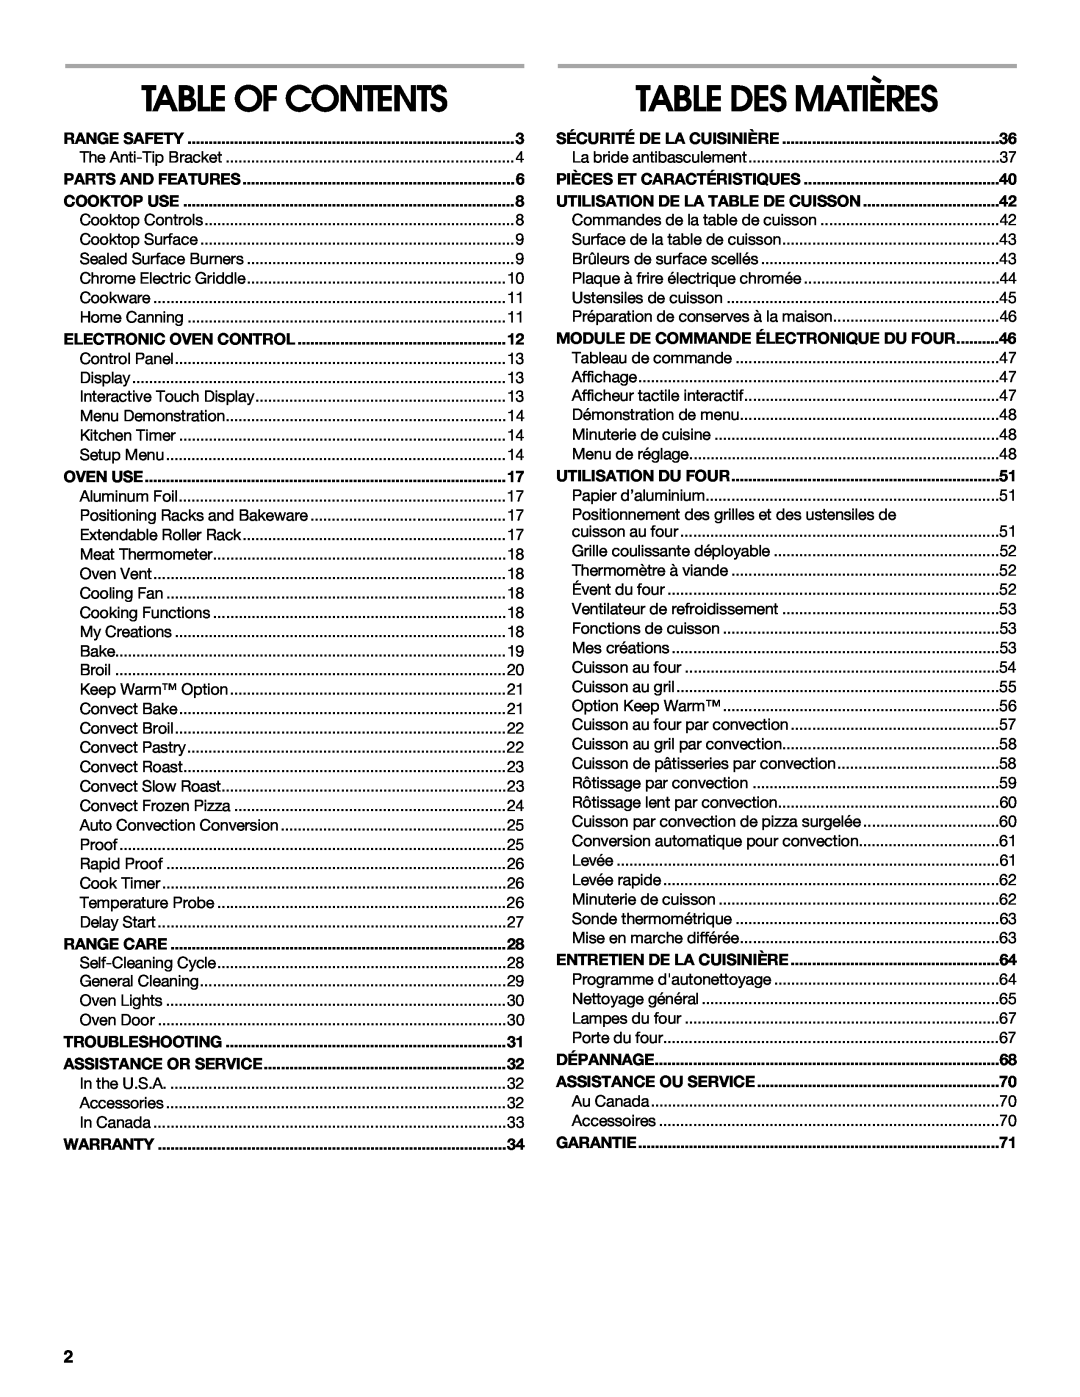 Jenn-Air JDRP430, JDRP436, JDRP536, JDRP548 manual Table Des Matières, Table Of Contents 